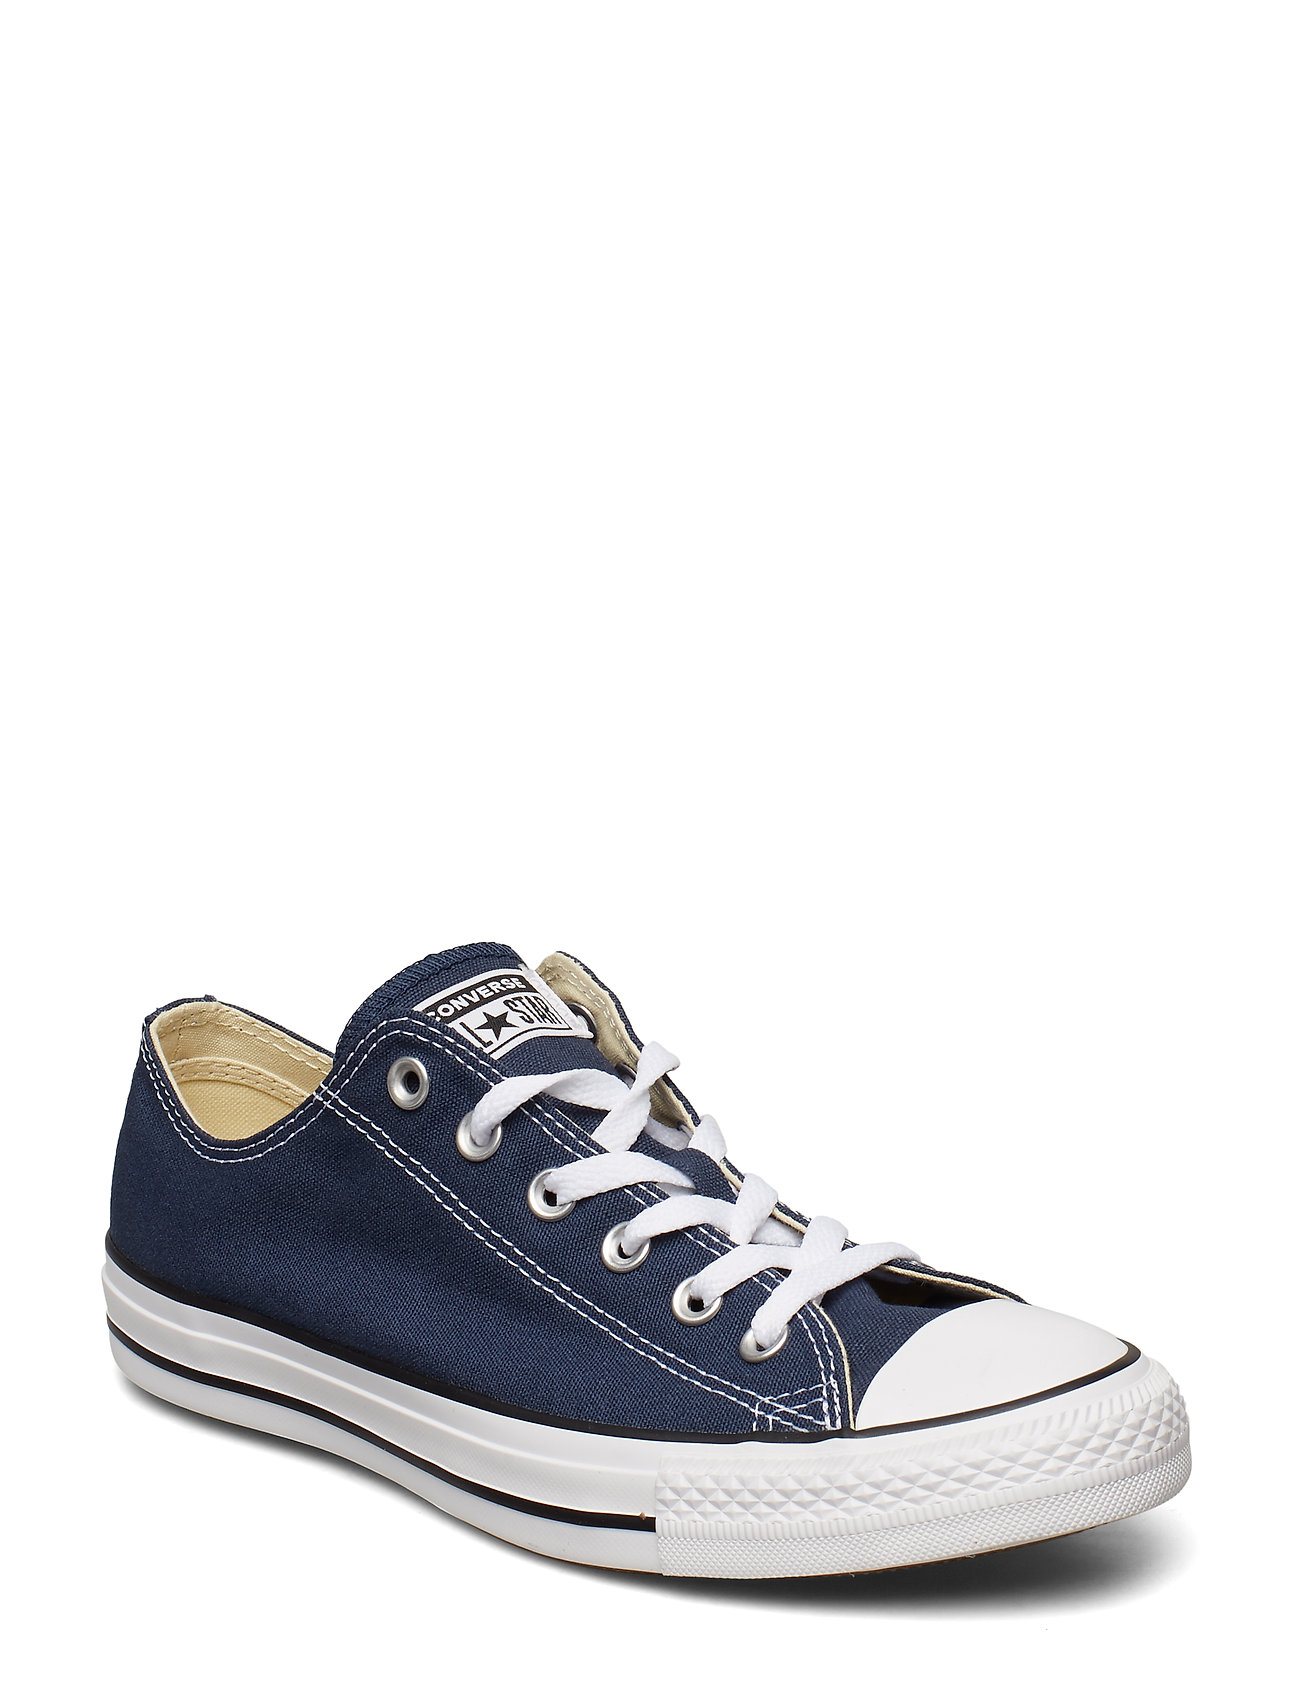 Converse "Chuck Taylor All Star Low-top Sneakers Blue Converse"